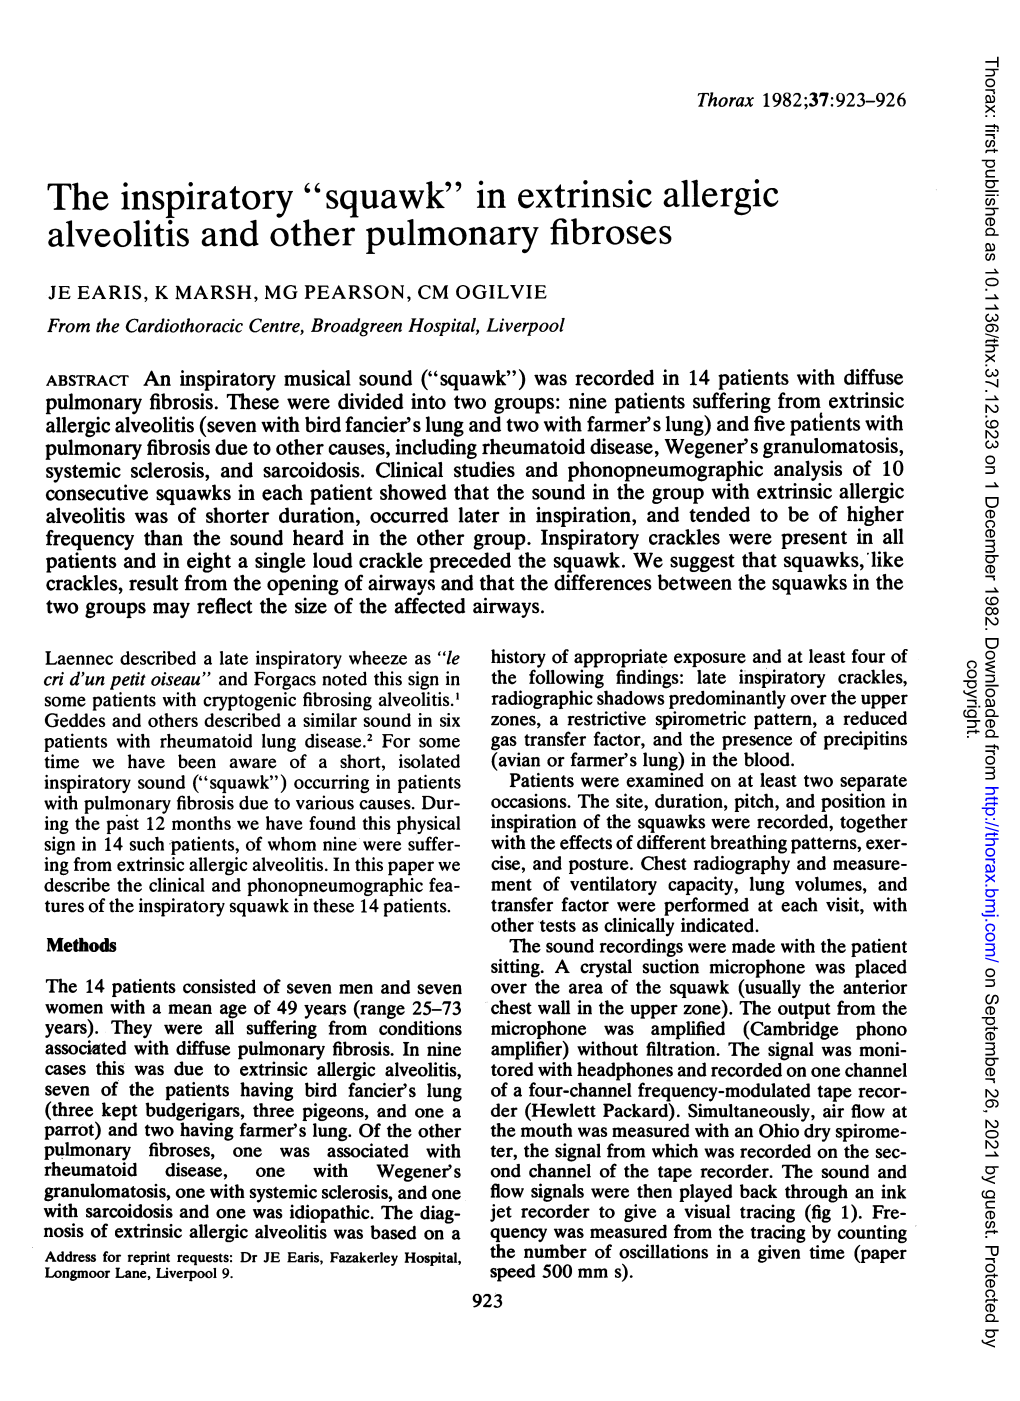 The Inspiratory "Squawk" in Extrinsic Allergic Alveolitis and Other Pulmonary Fibroses